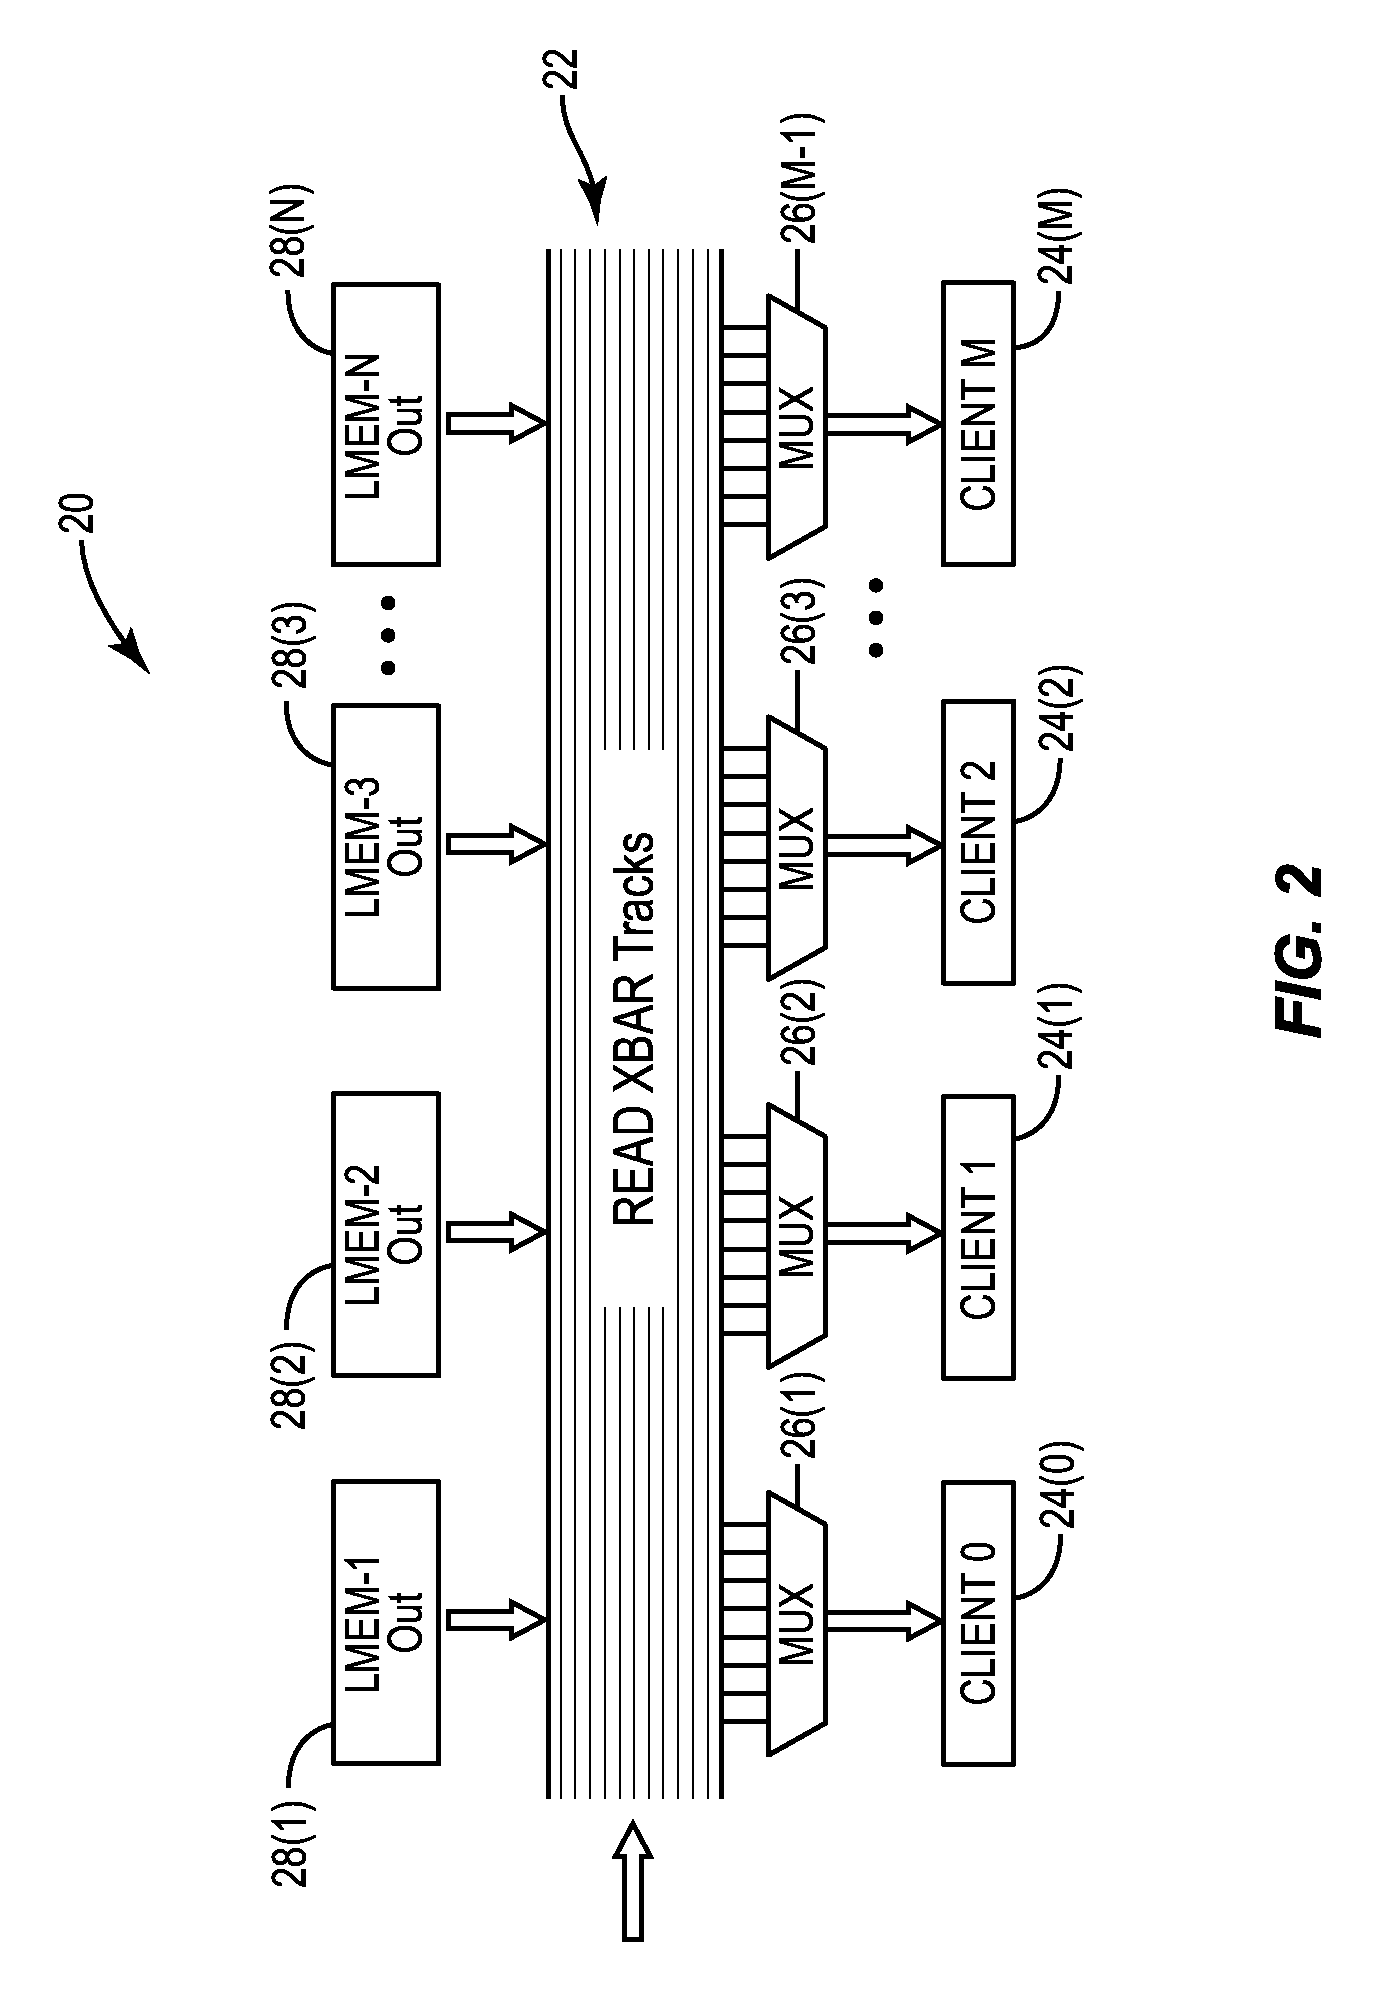 Monolithic three dimensional (3D) integrated circuits (ICs) (3DICs) with vertical memory components, related systems and methods